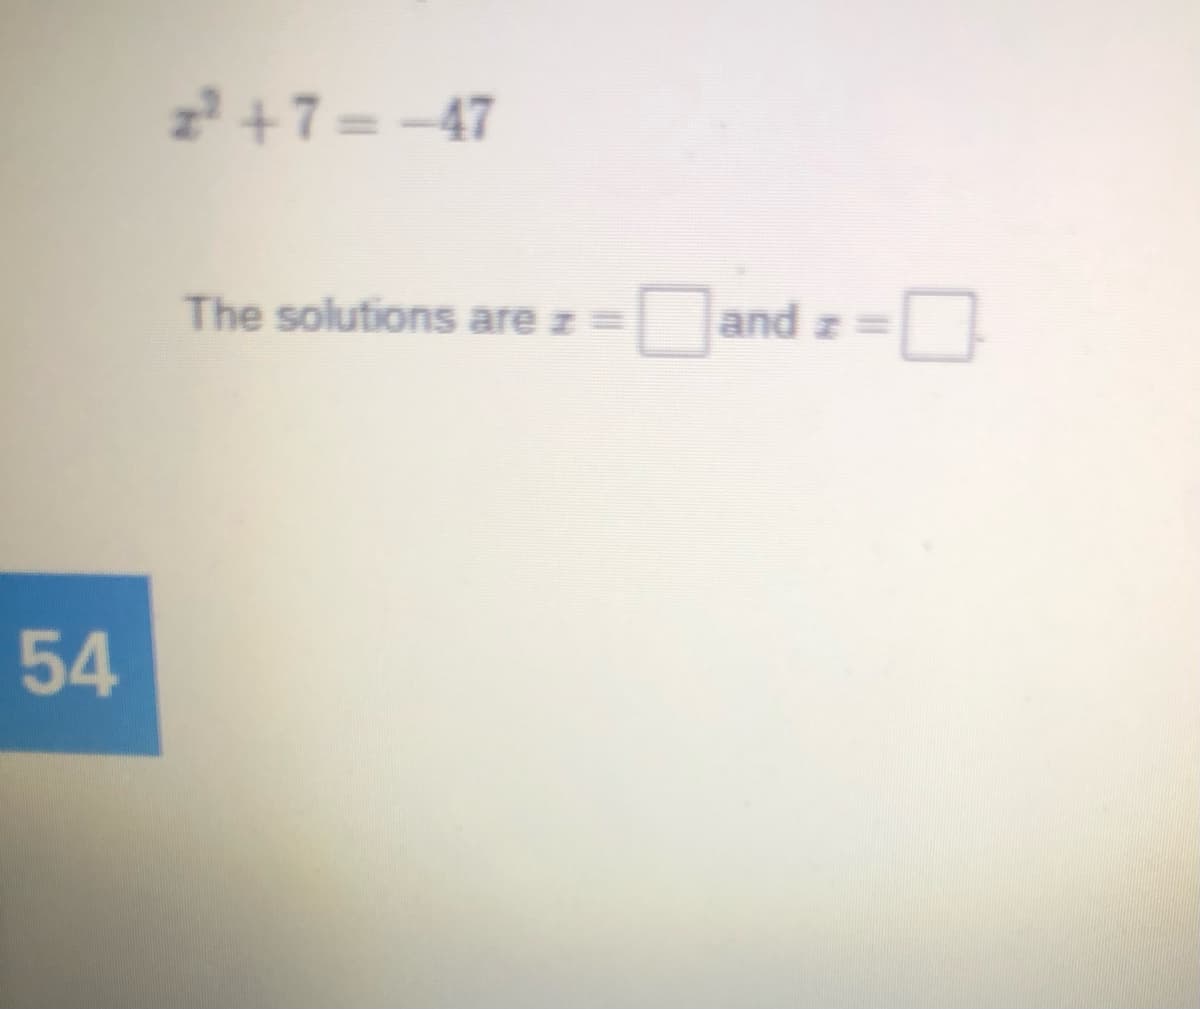 2+7= -47
The solutions are z =
and z=
54
